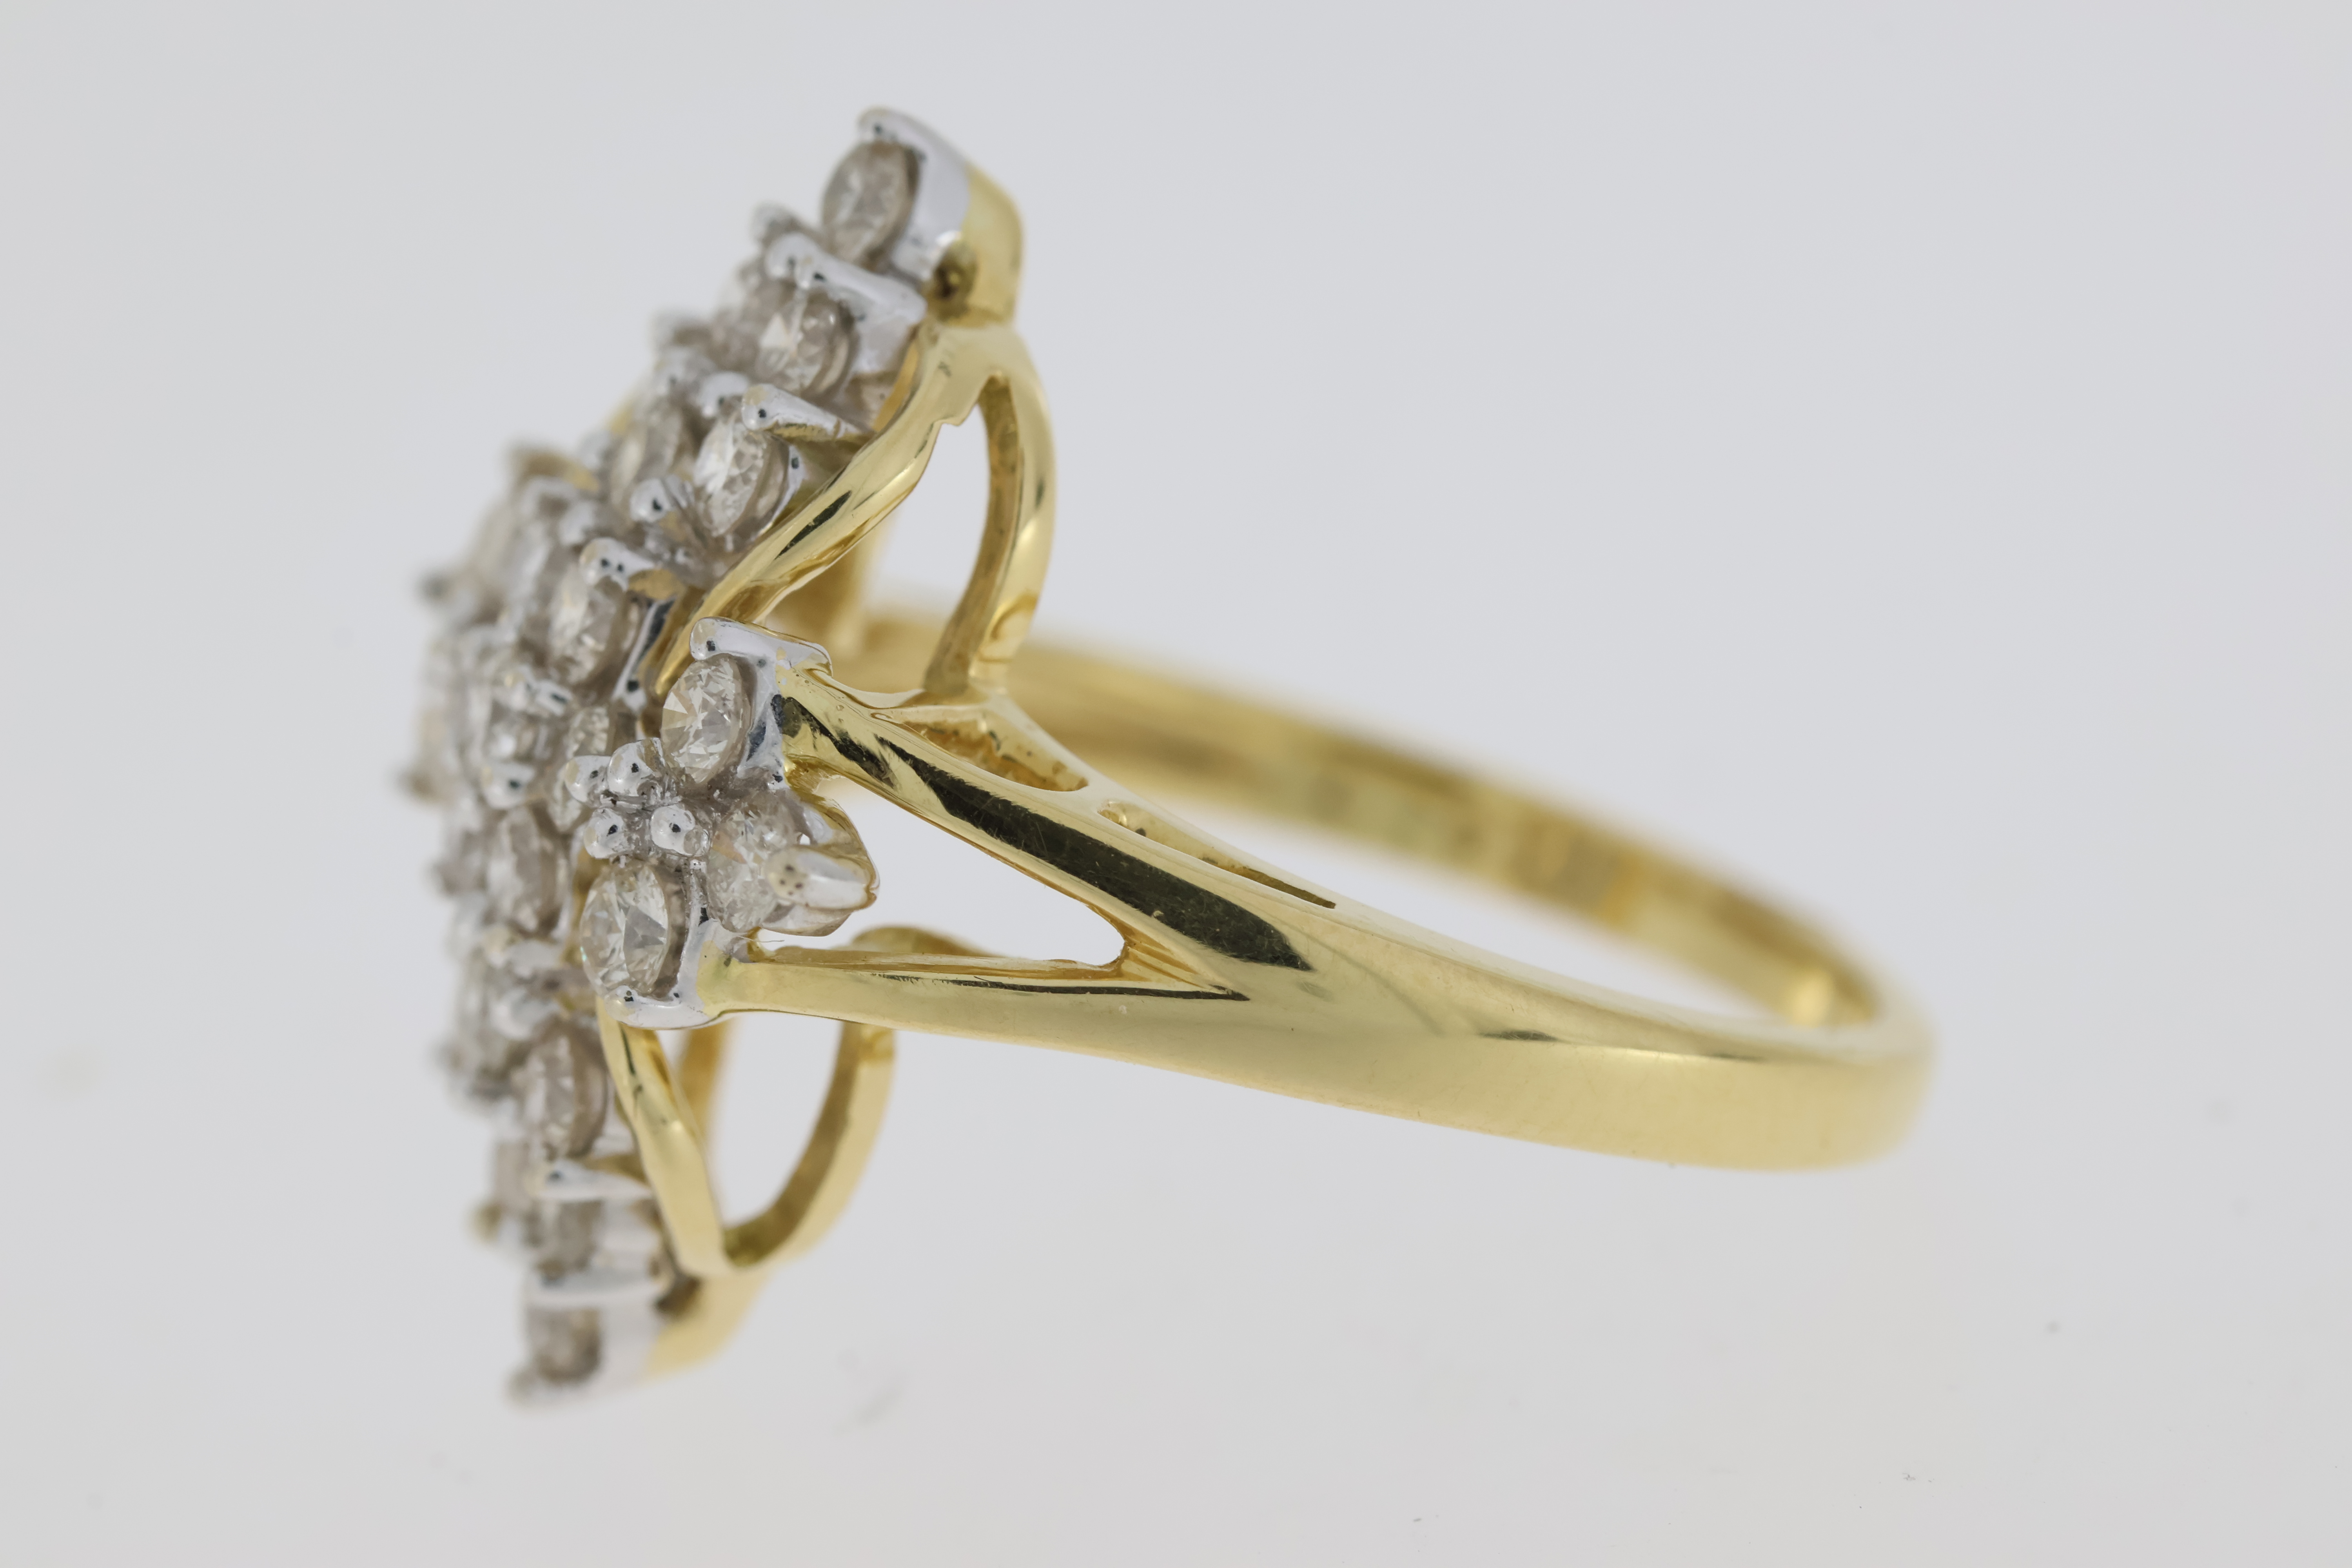 18 carat yellow gold diamond navette shaped dress ring with split shoulders. Full hall mark - Image 3 of 6